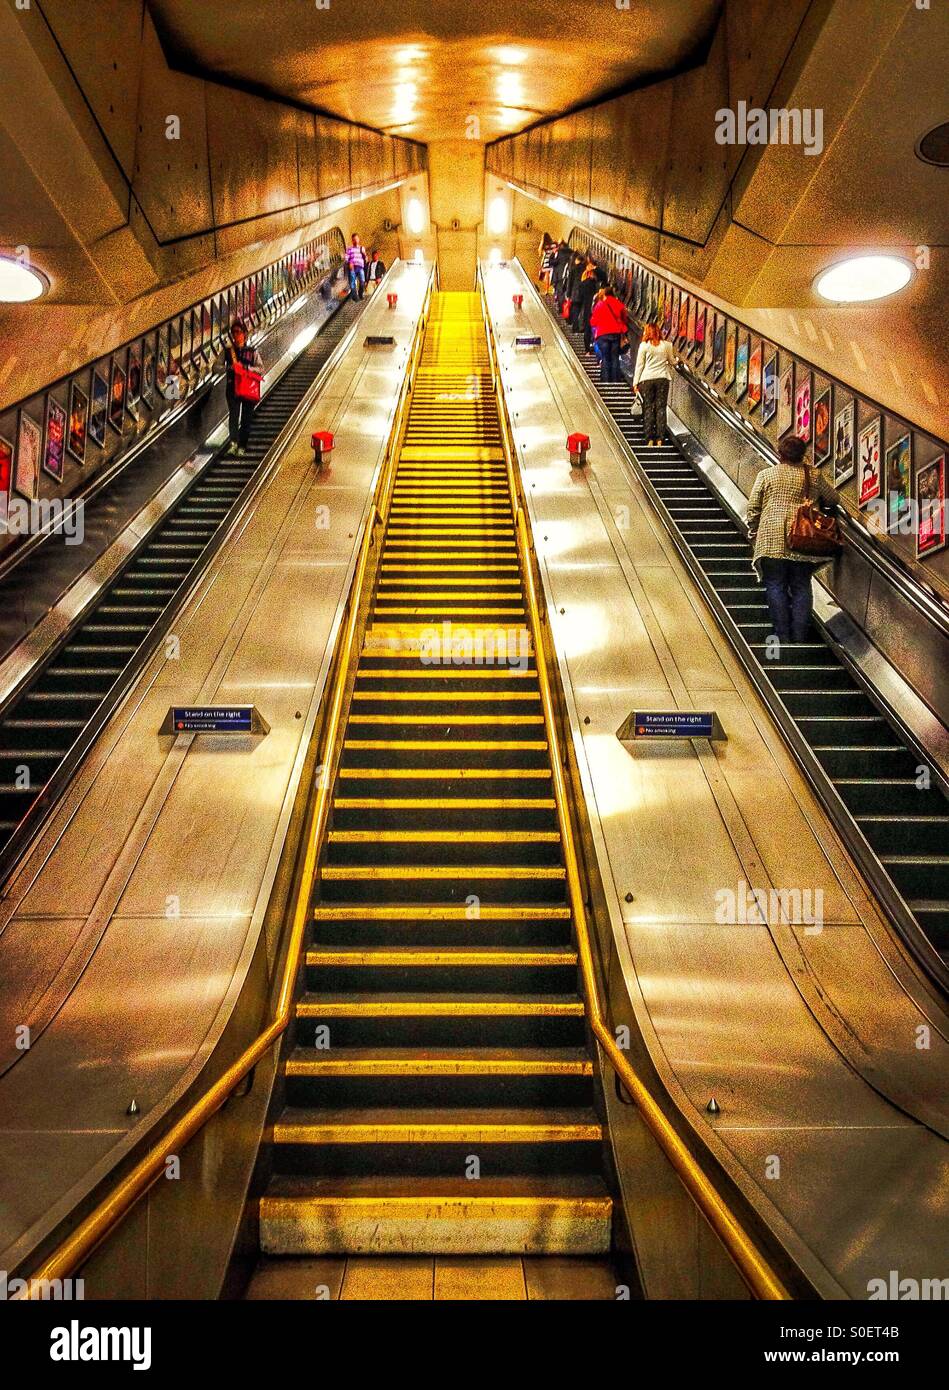 Stairs and escalator at Sloane Square station. Stock Photo